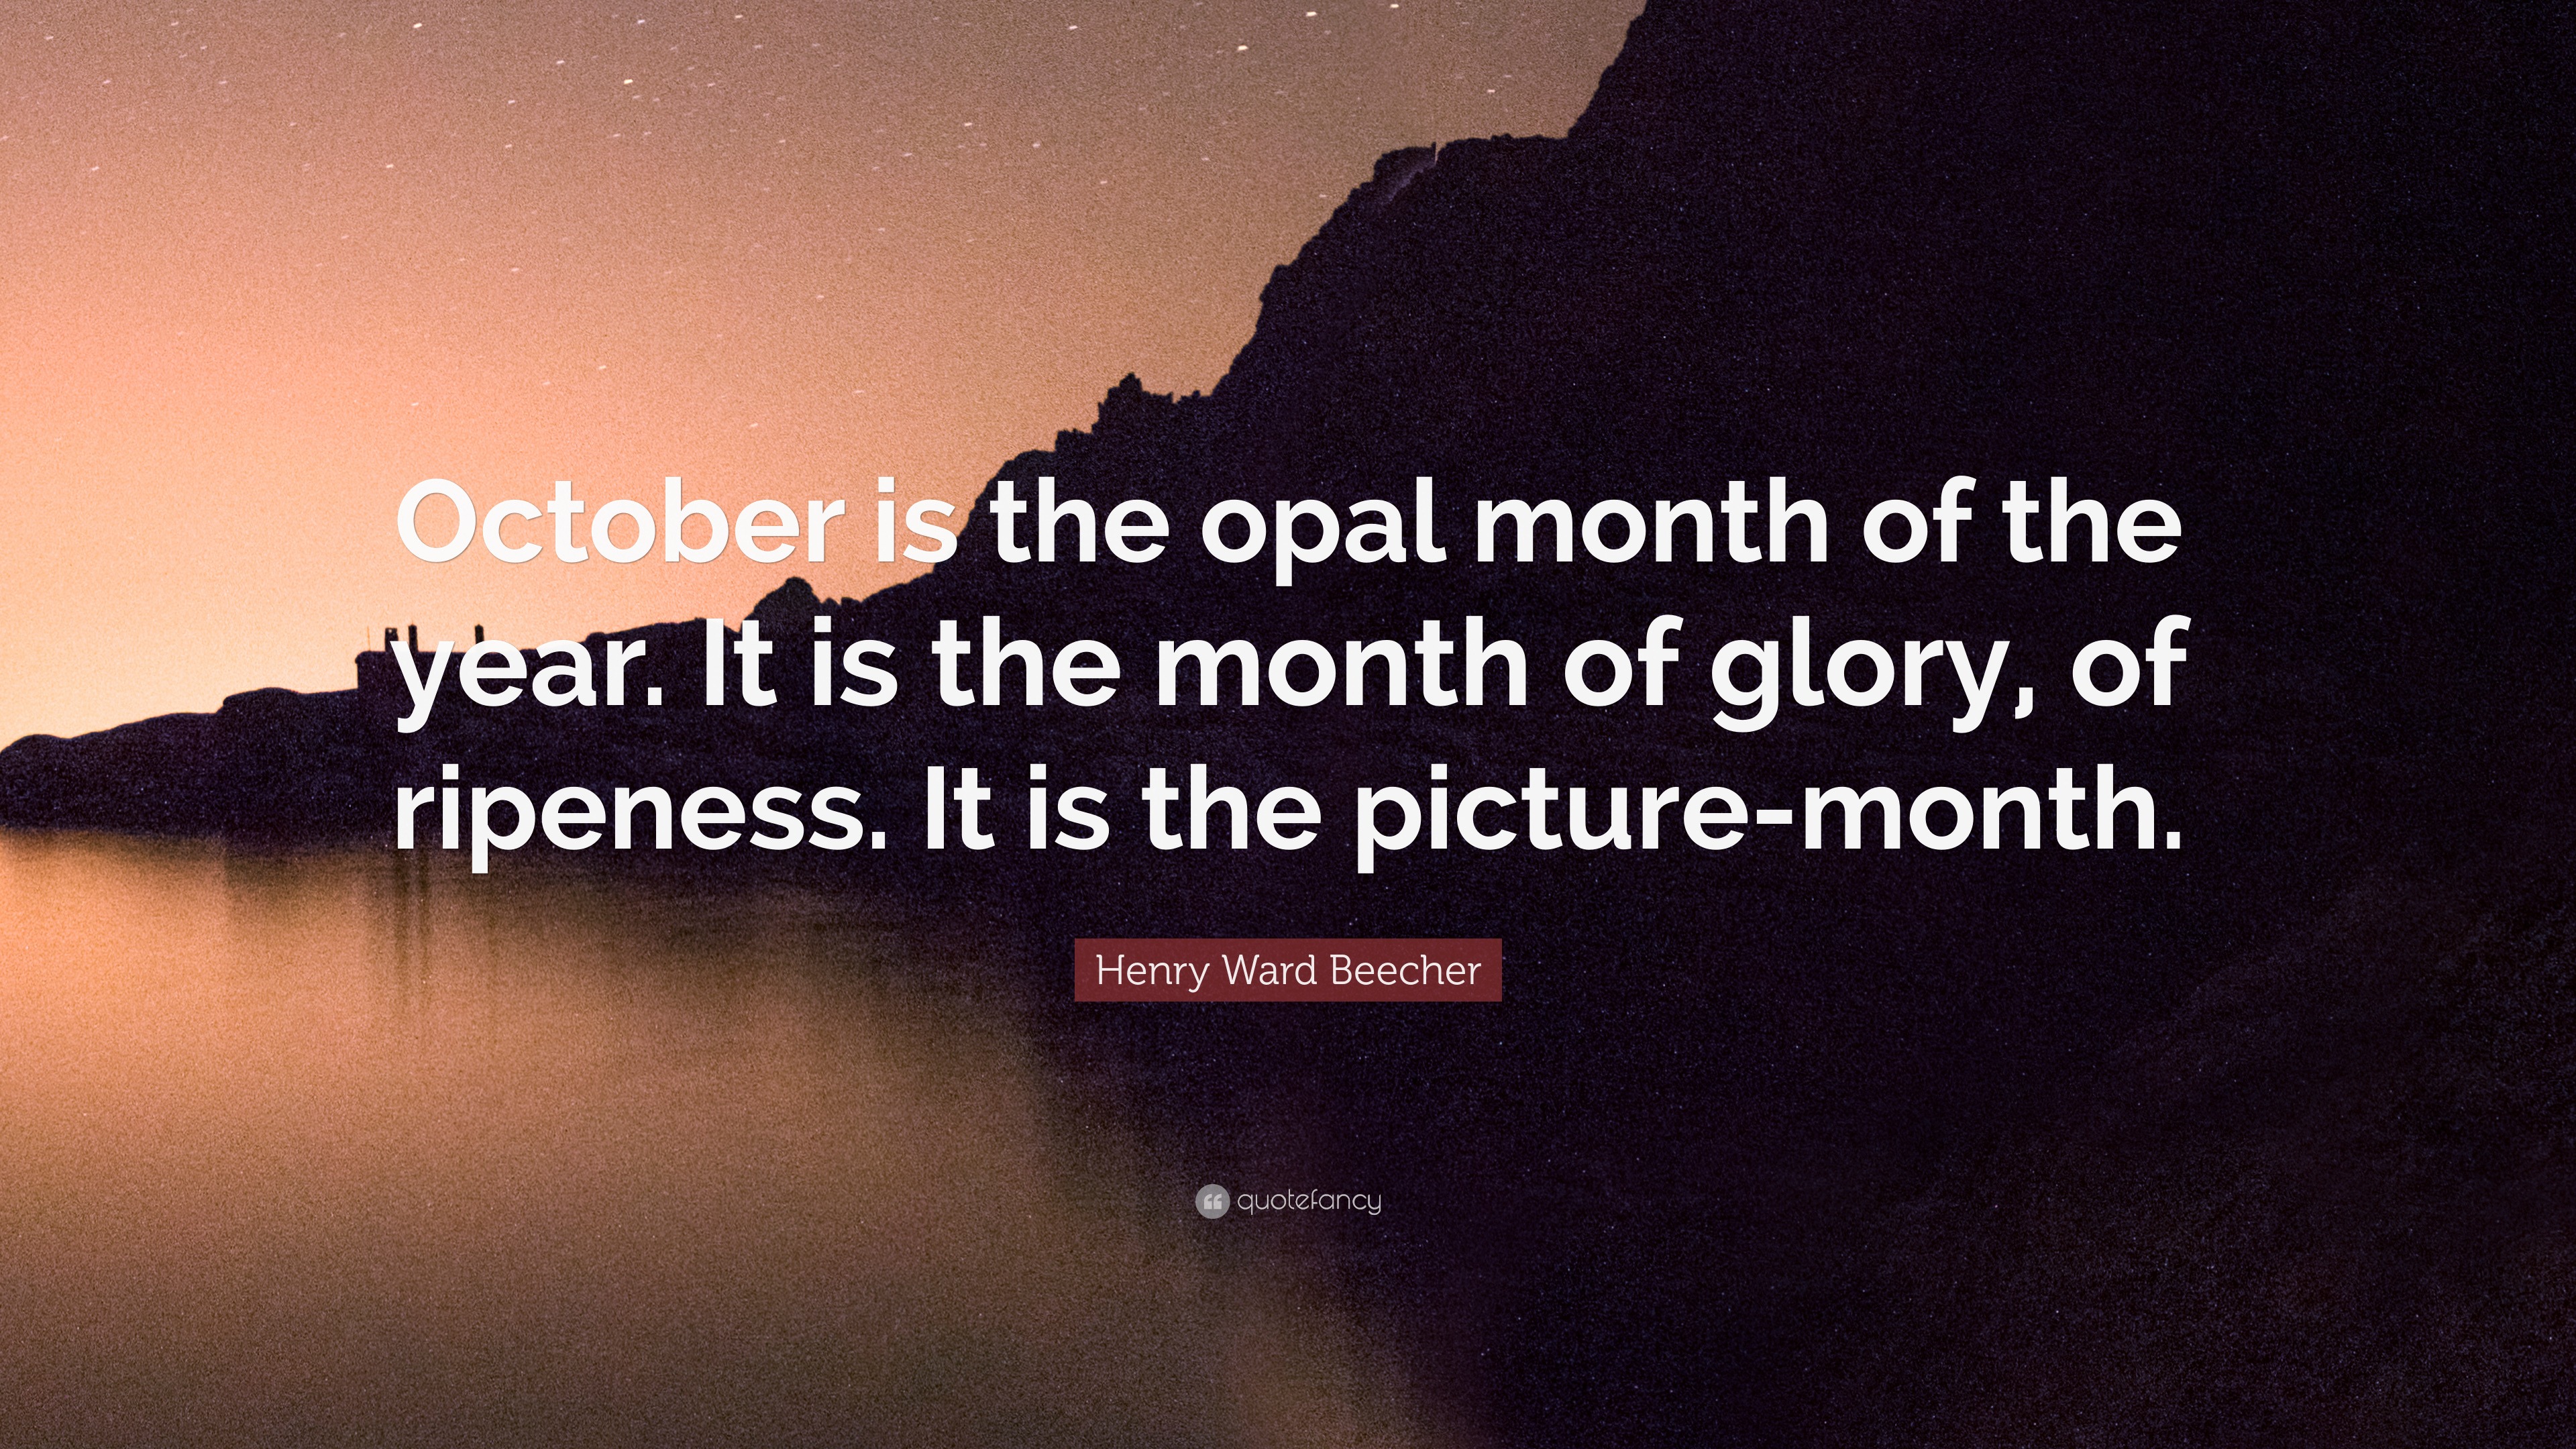 Image result for october is the opal month of the year